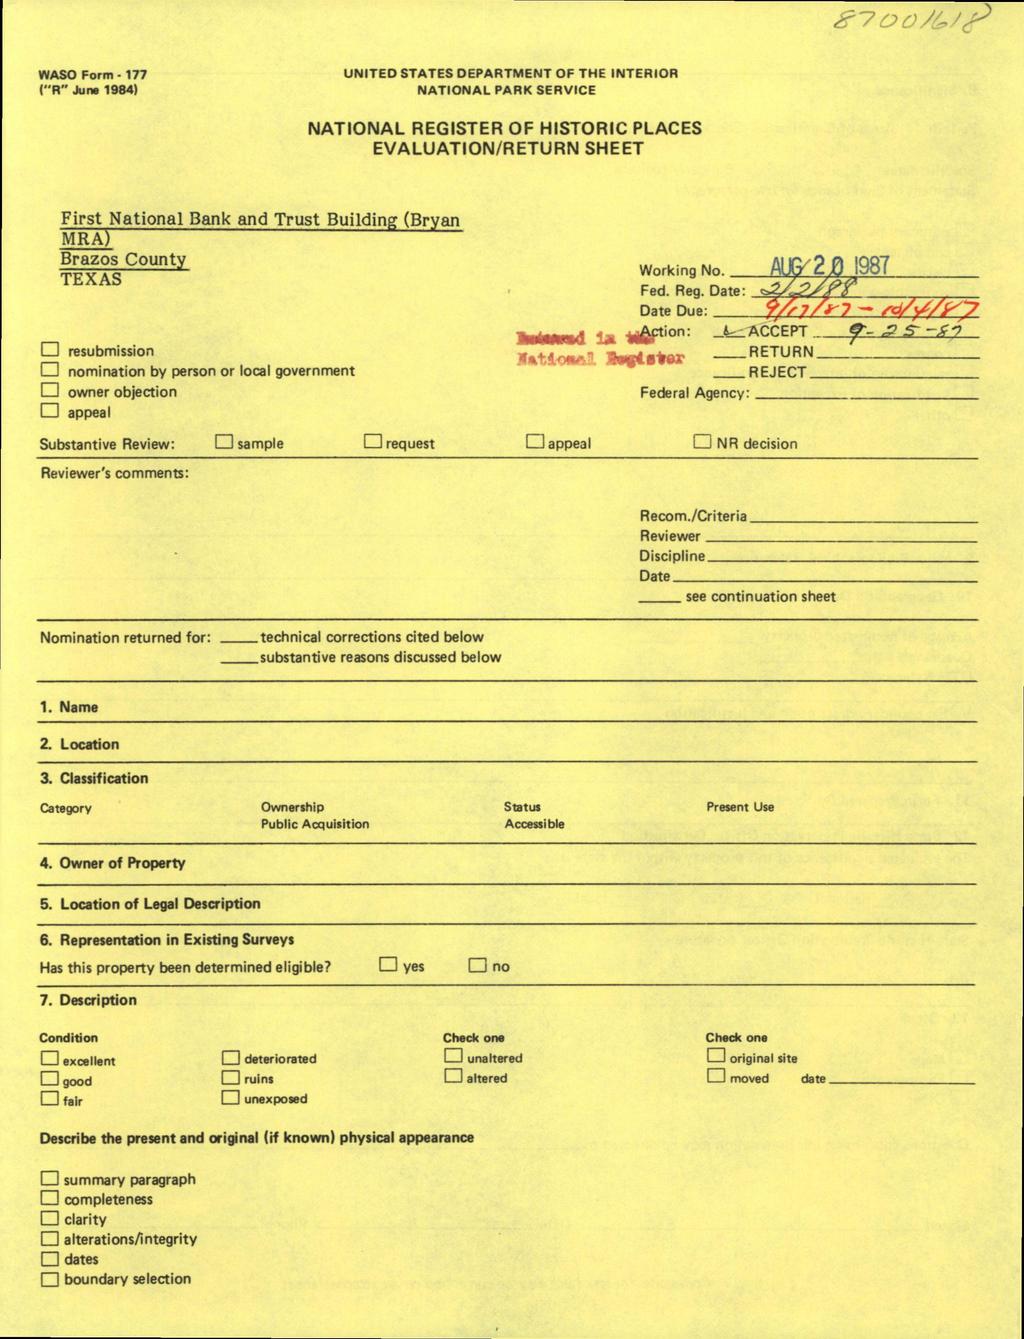 ^7007/(:,7/^ WASO Form - 177 ("R" Juna 1984) UNITED STATES DEPARTMENT OF THE INTERIOR NATIONAL PARK SERVICE NATIONAL REGISTER OF HISTORIC PLACES EVALUATION/RETURN SHEET First National Bank and Trust